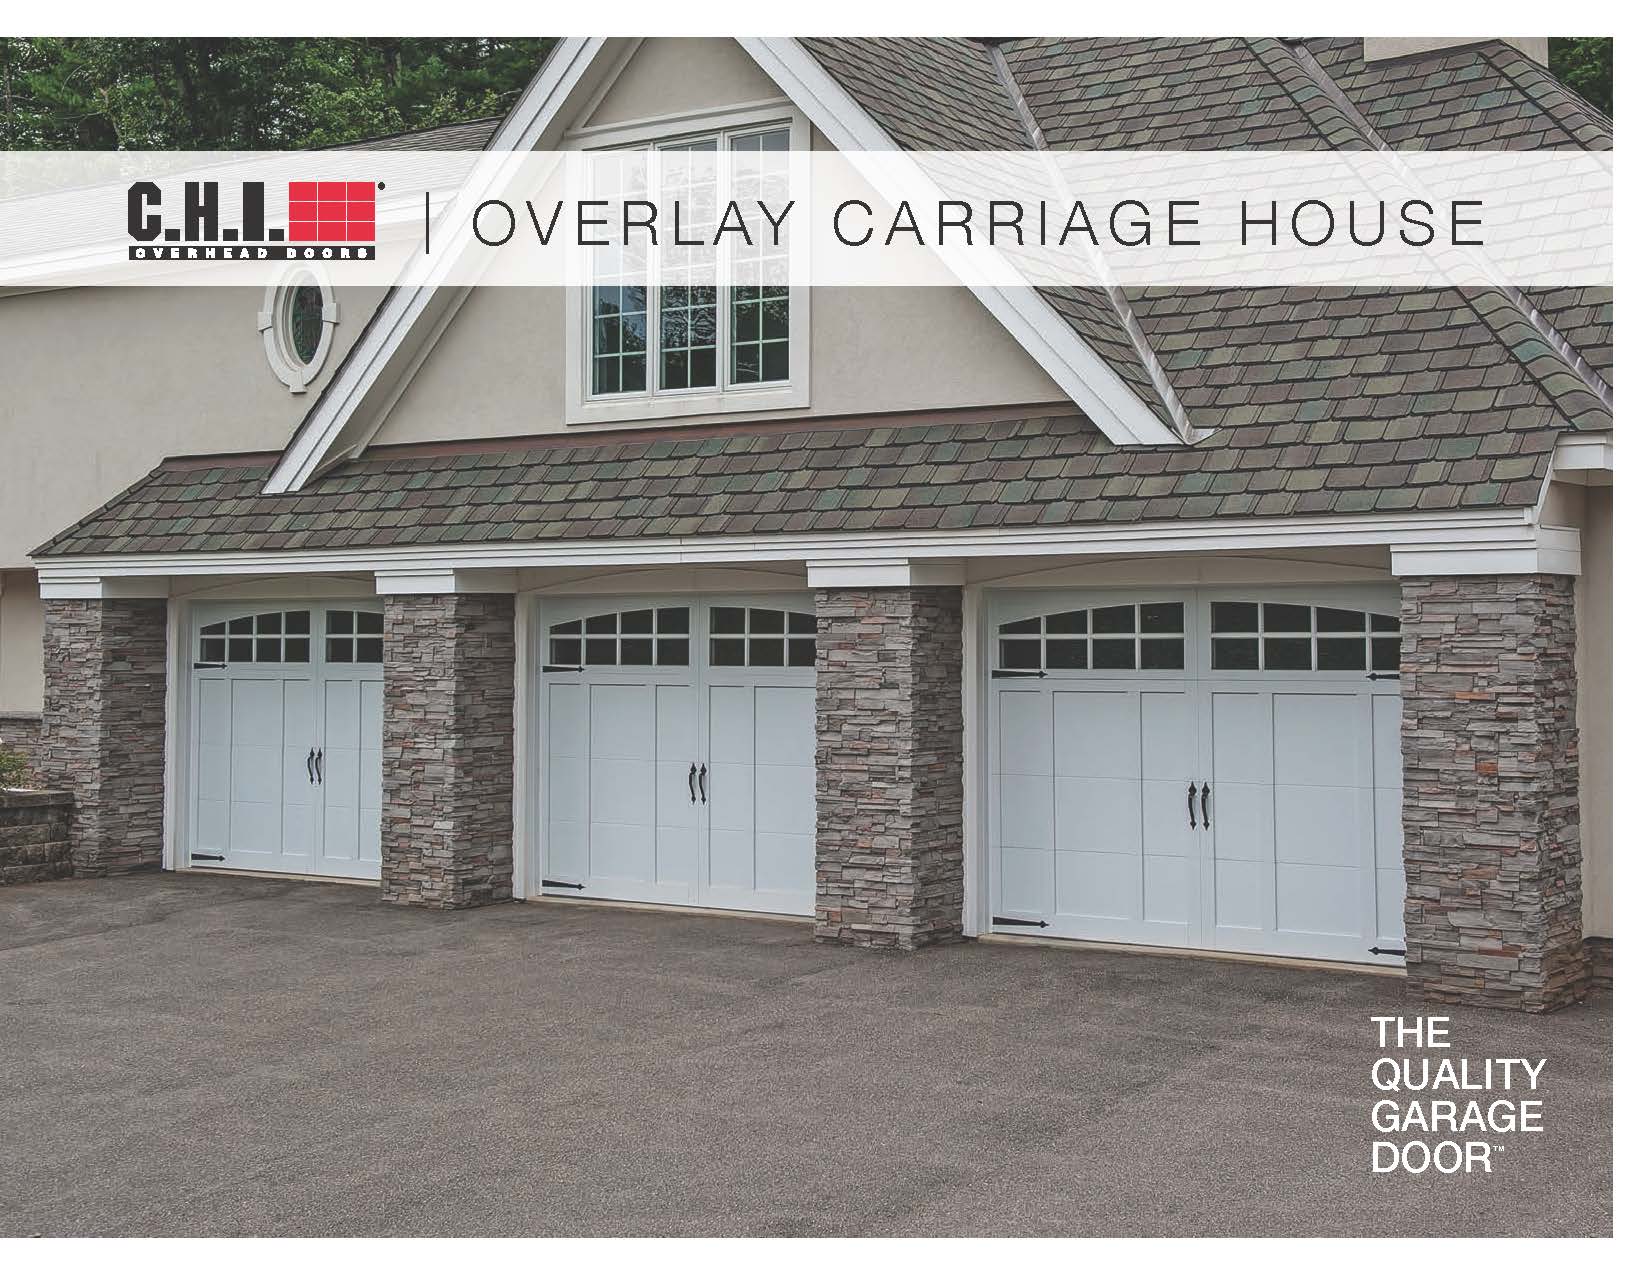 This is the brochure for Amarr Overlay Carriage House Steel Garage Doors